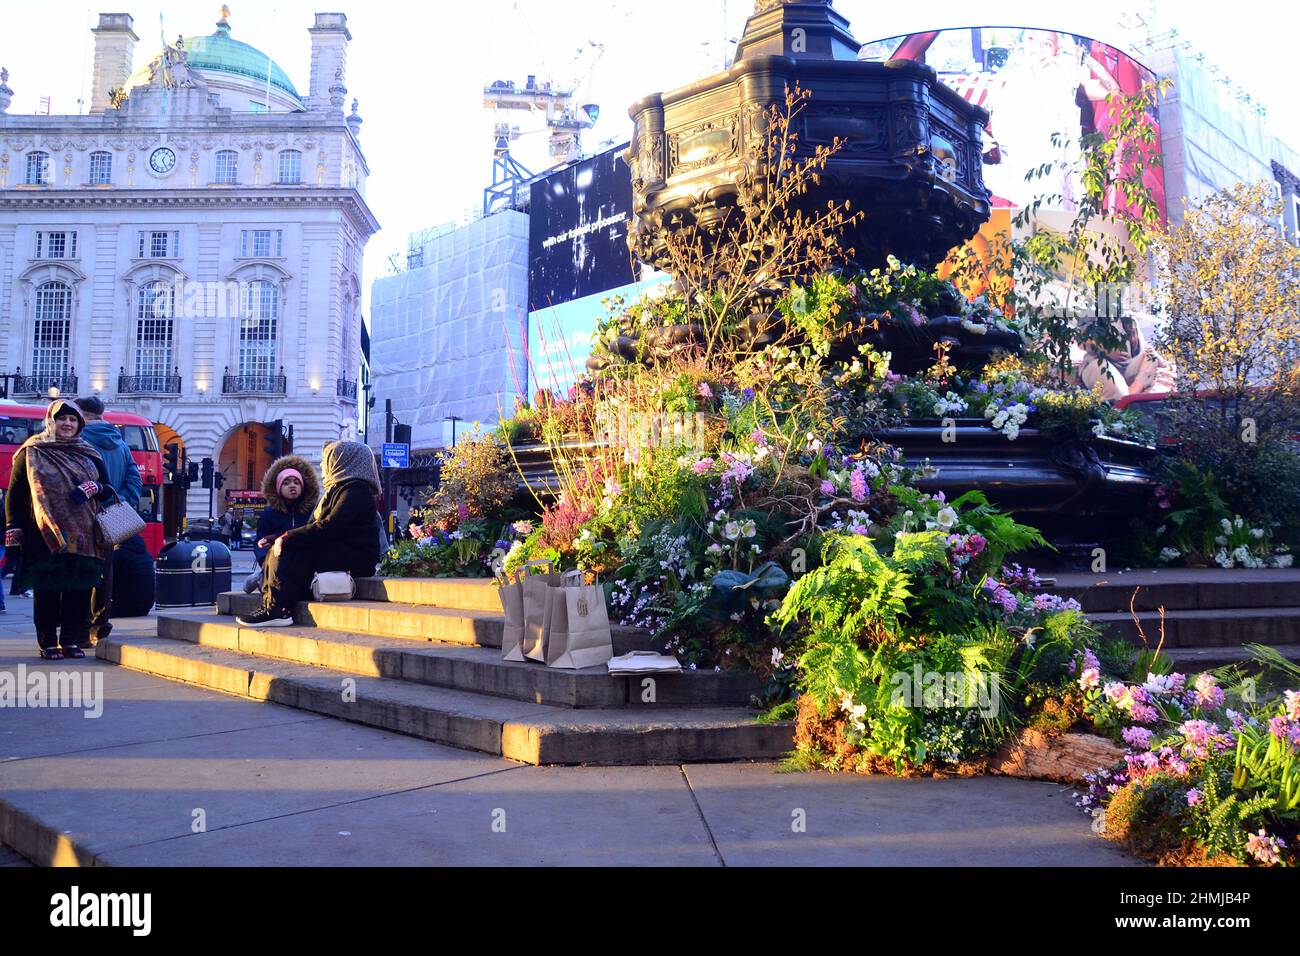 Plants and flowers cover the Shaftesbury Memorial Fountain,  often known as 'Eros', in Piccadilly Circus, London, England, United Kingdom. This advertises  a Green Planet augmented reality experience opening in Piccadilly Circus on 11th February, 2022. Partners and supporters in delivering the project include   BBC Earth, EE, Crown Estate, Factory 42, Kew Royal Botanic Gardens, Talesmith and Dimension. The project offers booking of free tickets online and runs until 9th March, 2022. People sit on the statue and enjoy the late afternoon sunshine. Stock Photo